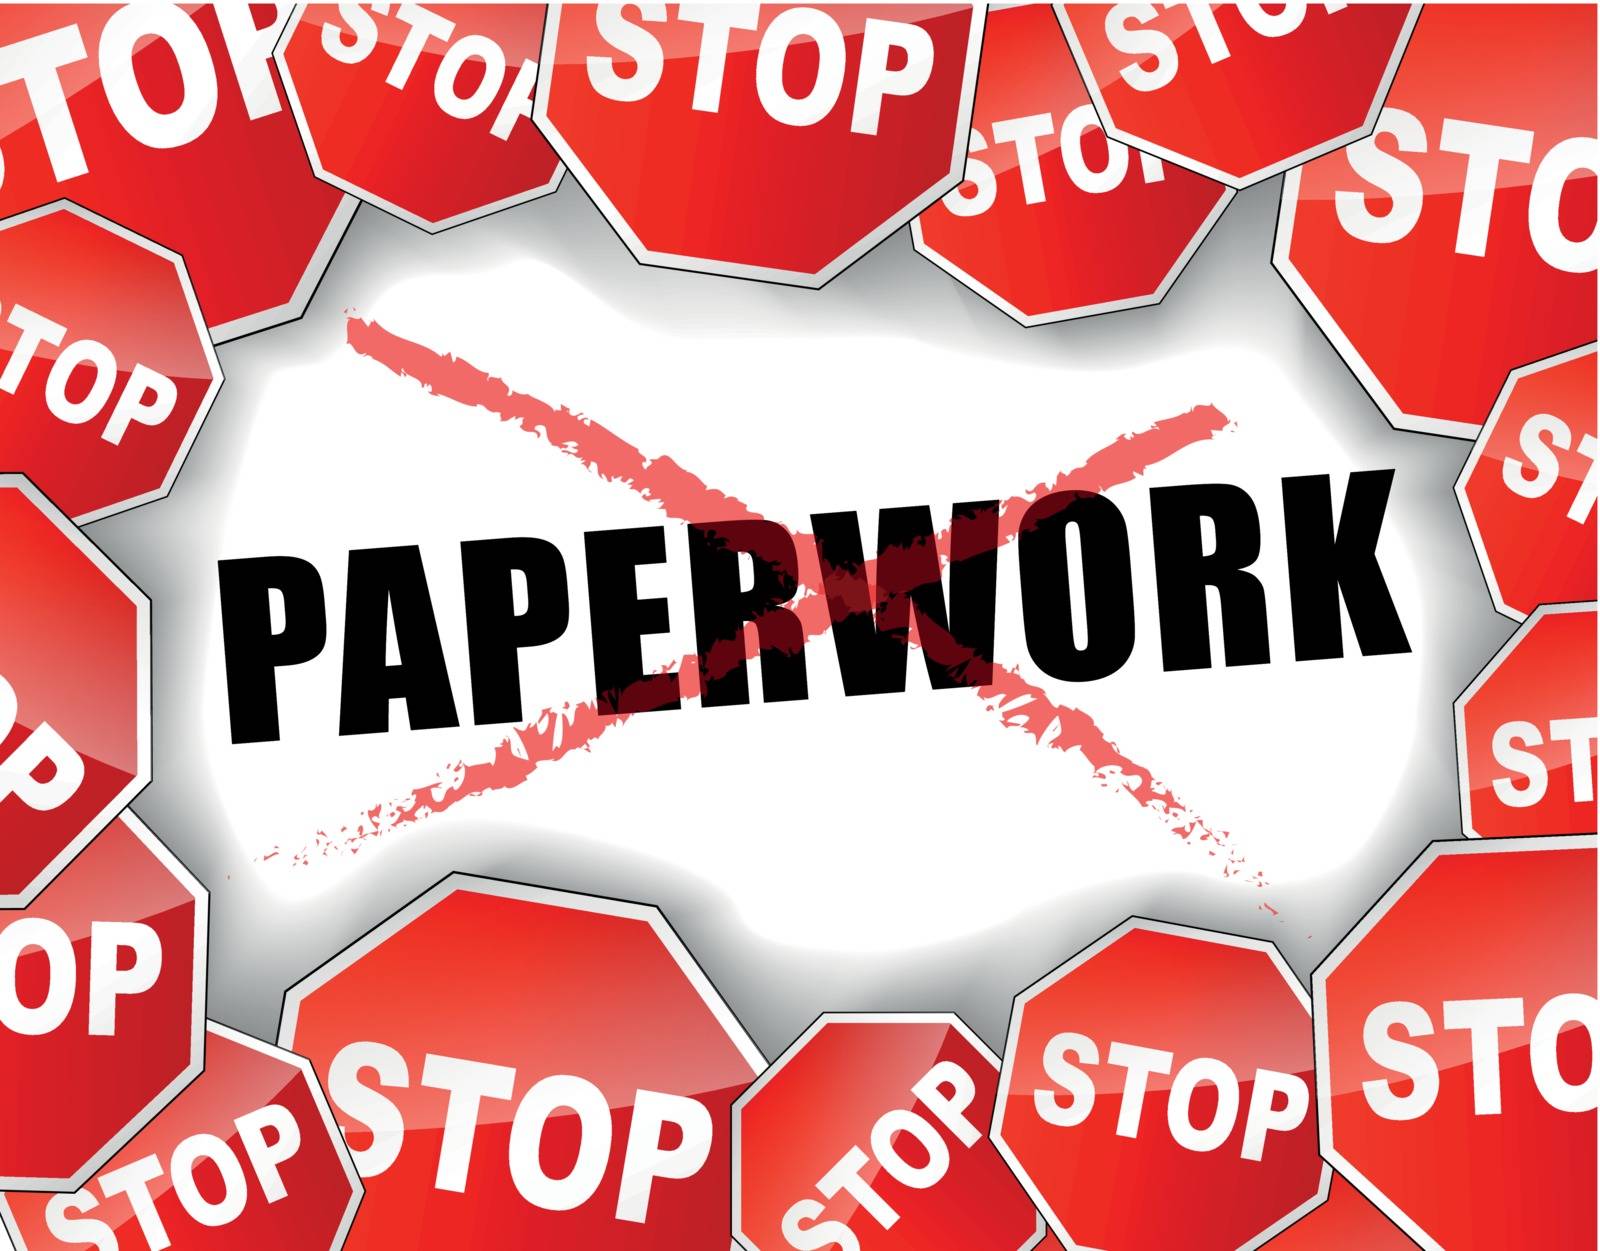 Vector illustration of stop paperwork concept background